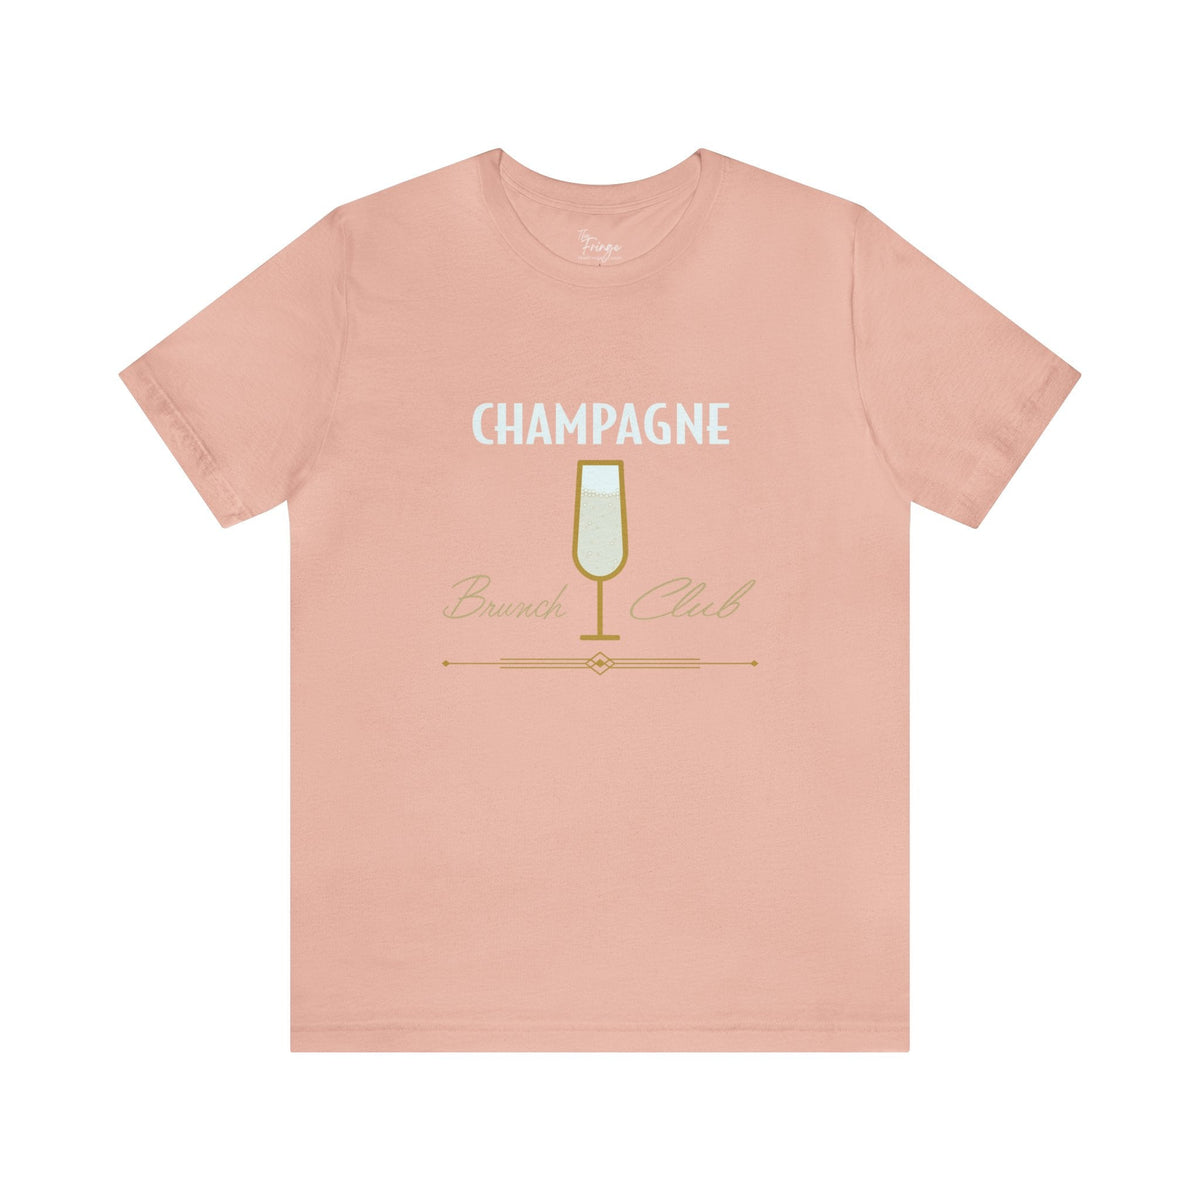 Champagne Brunch Club Graphic Tee